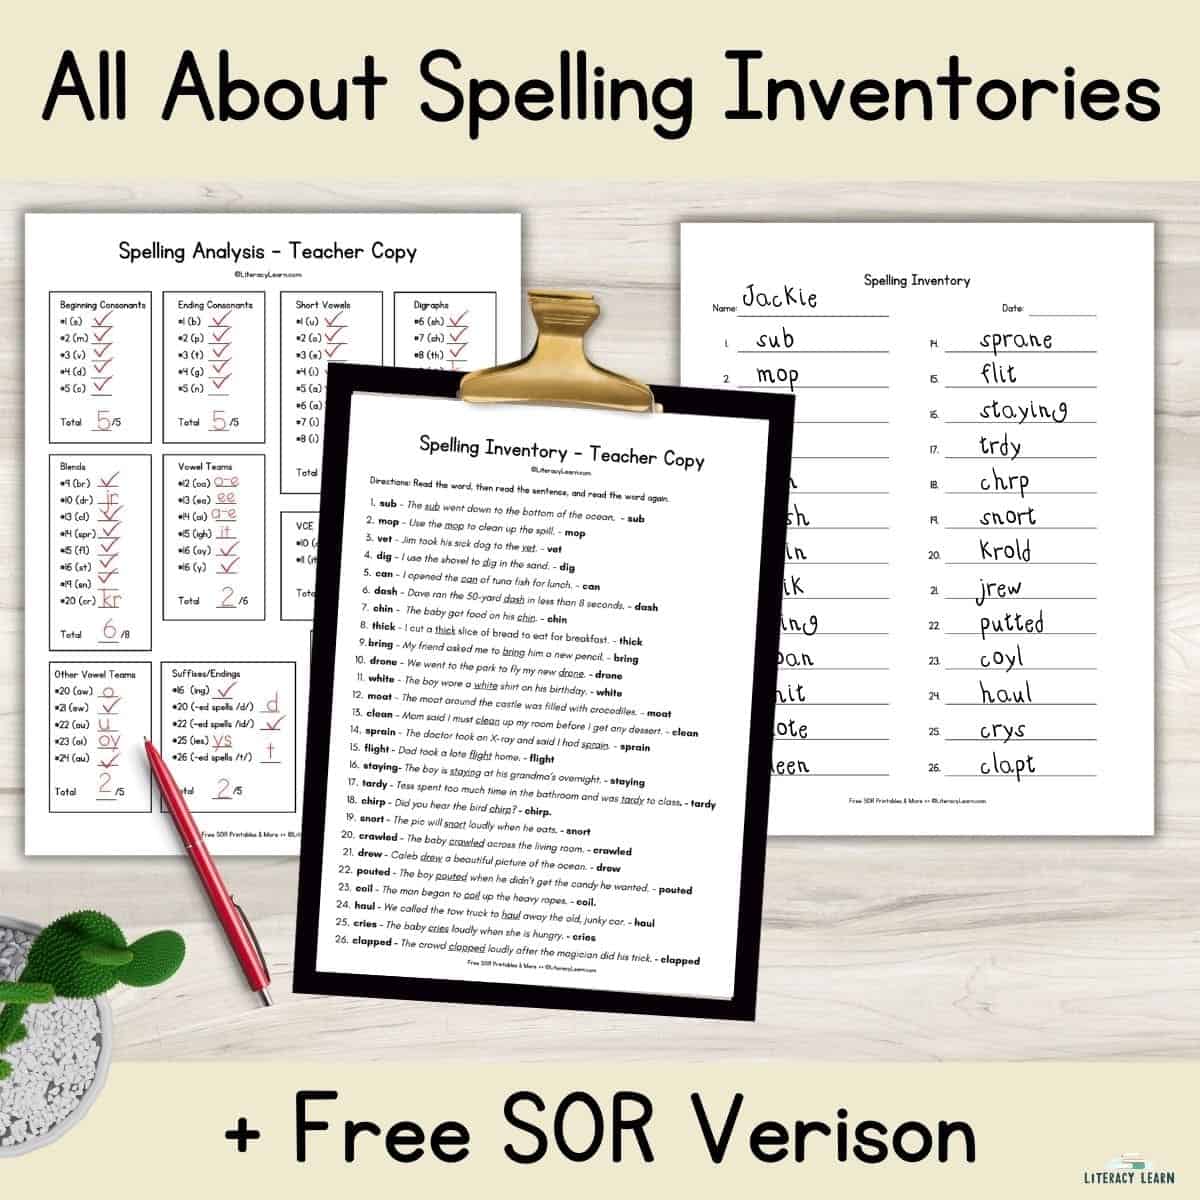 Graphic entitled "All About Spelling Inventories" with three pdf worksheets showing the free version.